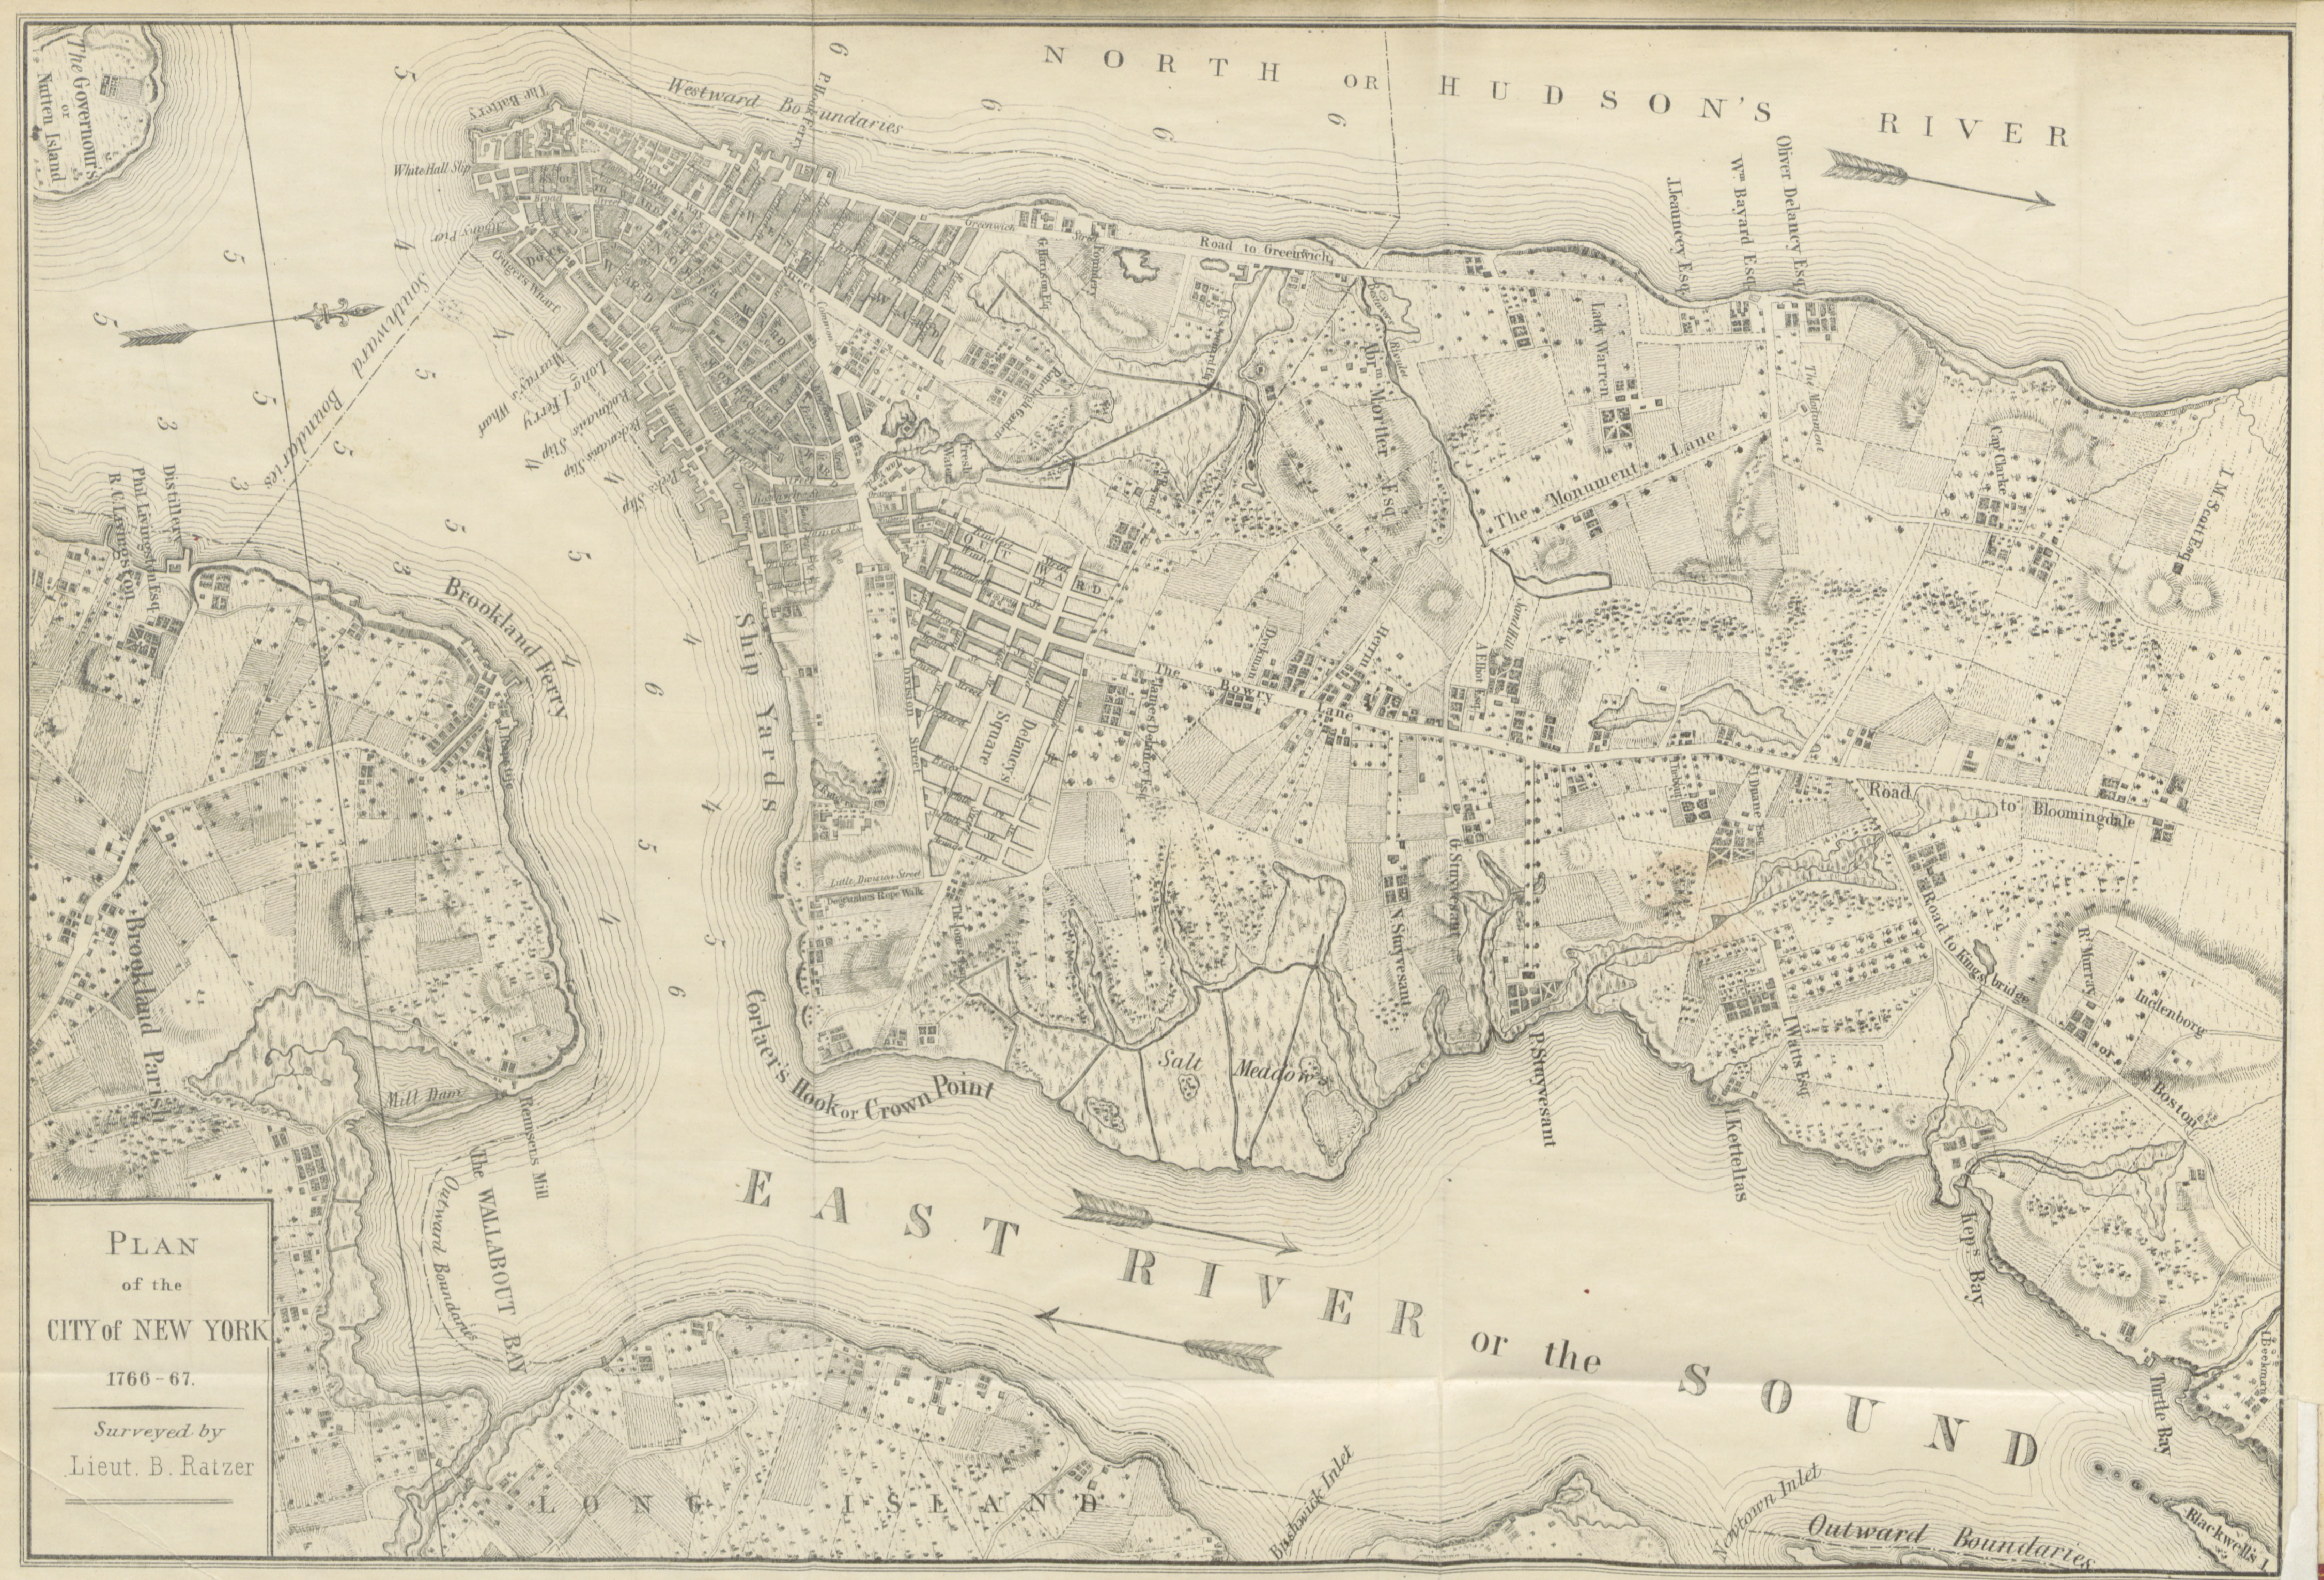 plan-of-the-city-of-new-york-1766-77-from-new-york-city-during-the-american-revolution-1861--british-library-board